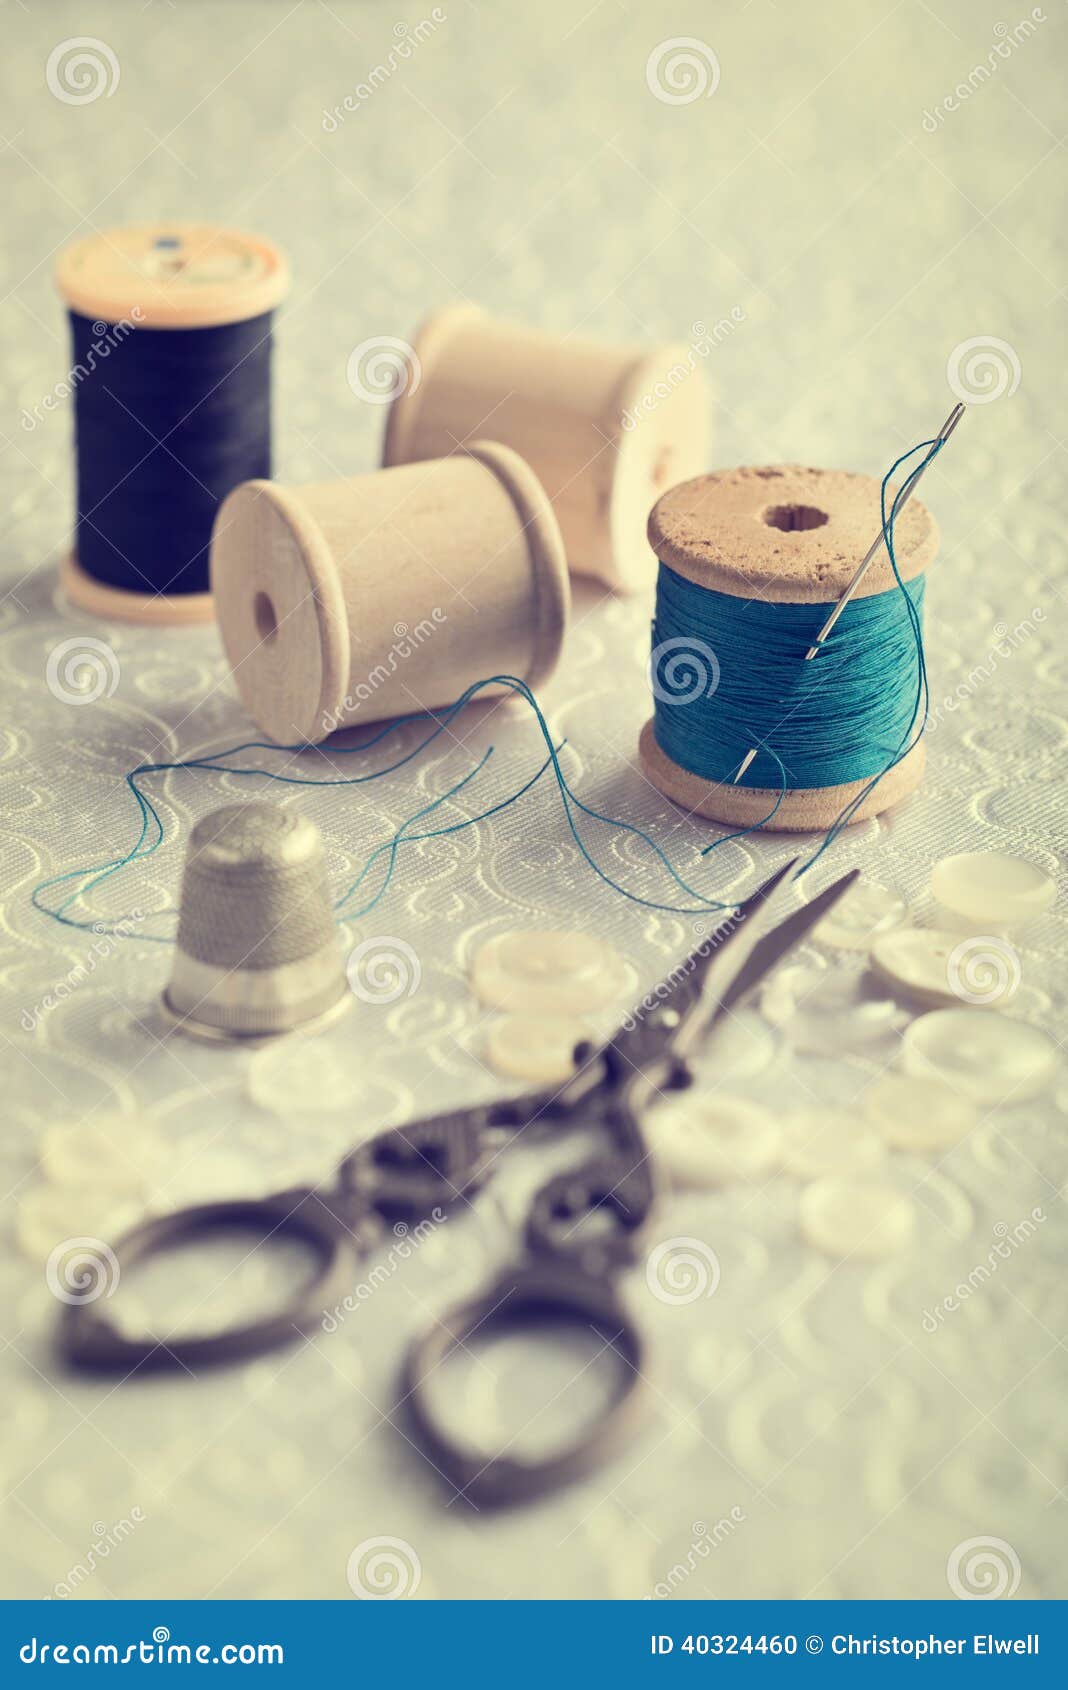 Sewing Cotton stock photo. Image of style, craft, textile - 40324460